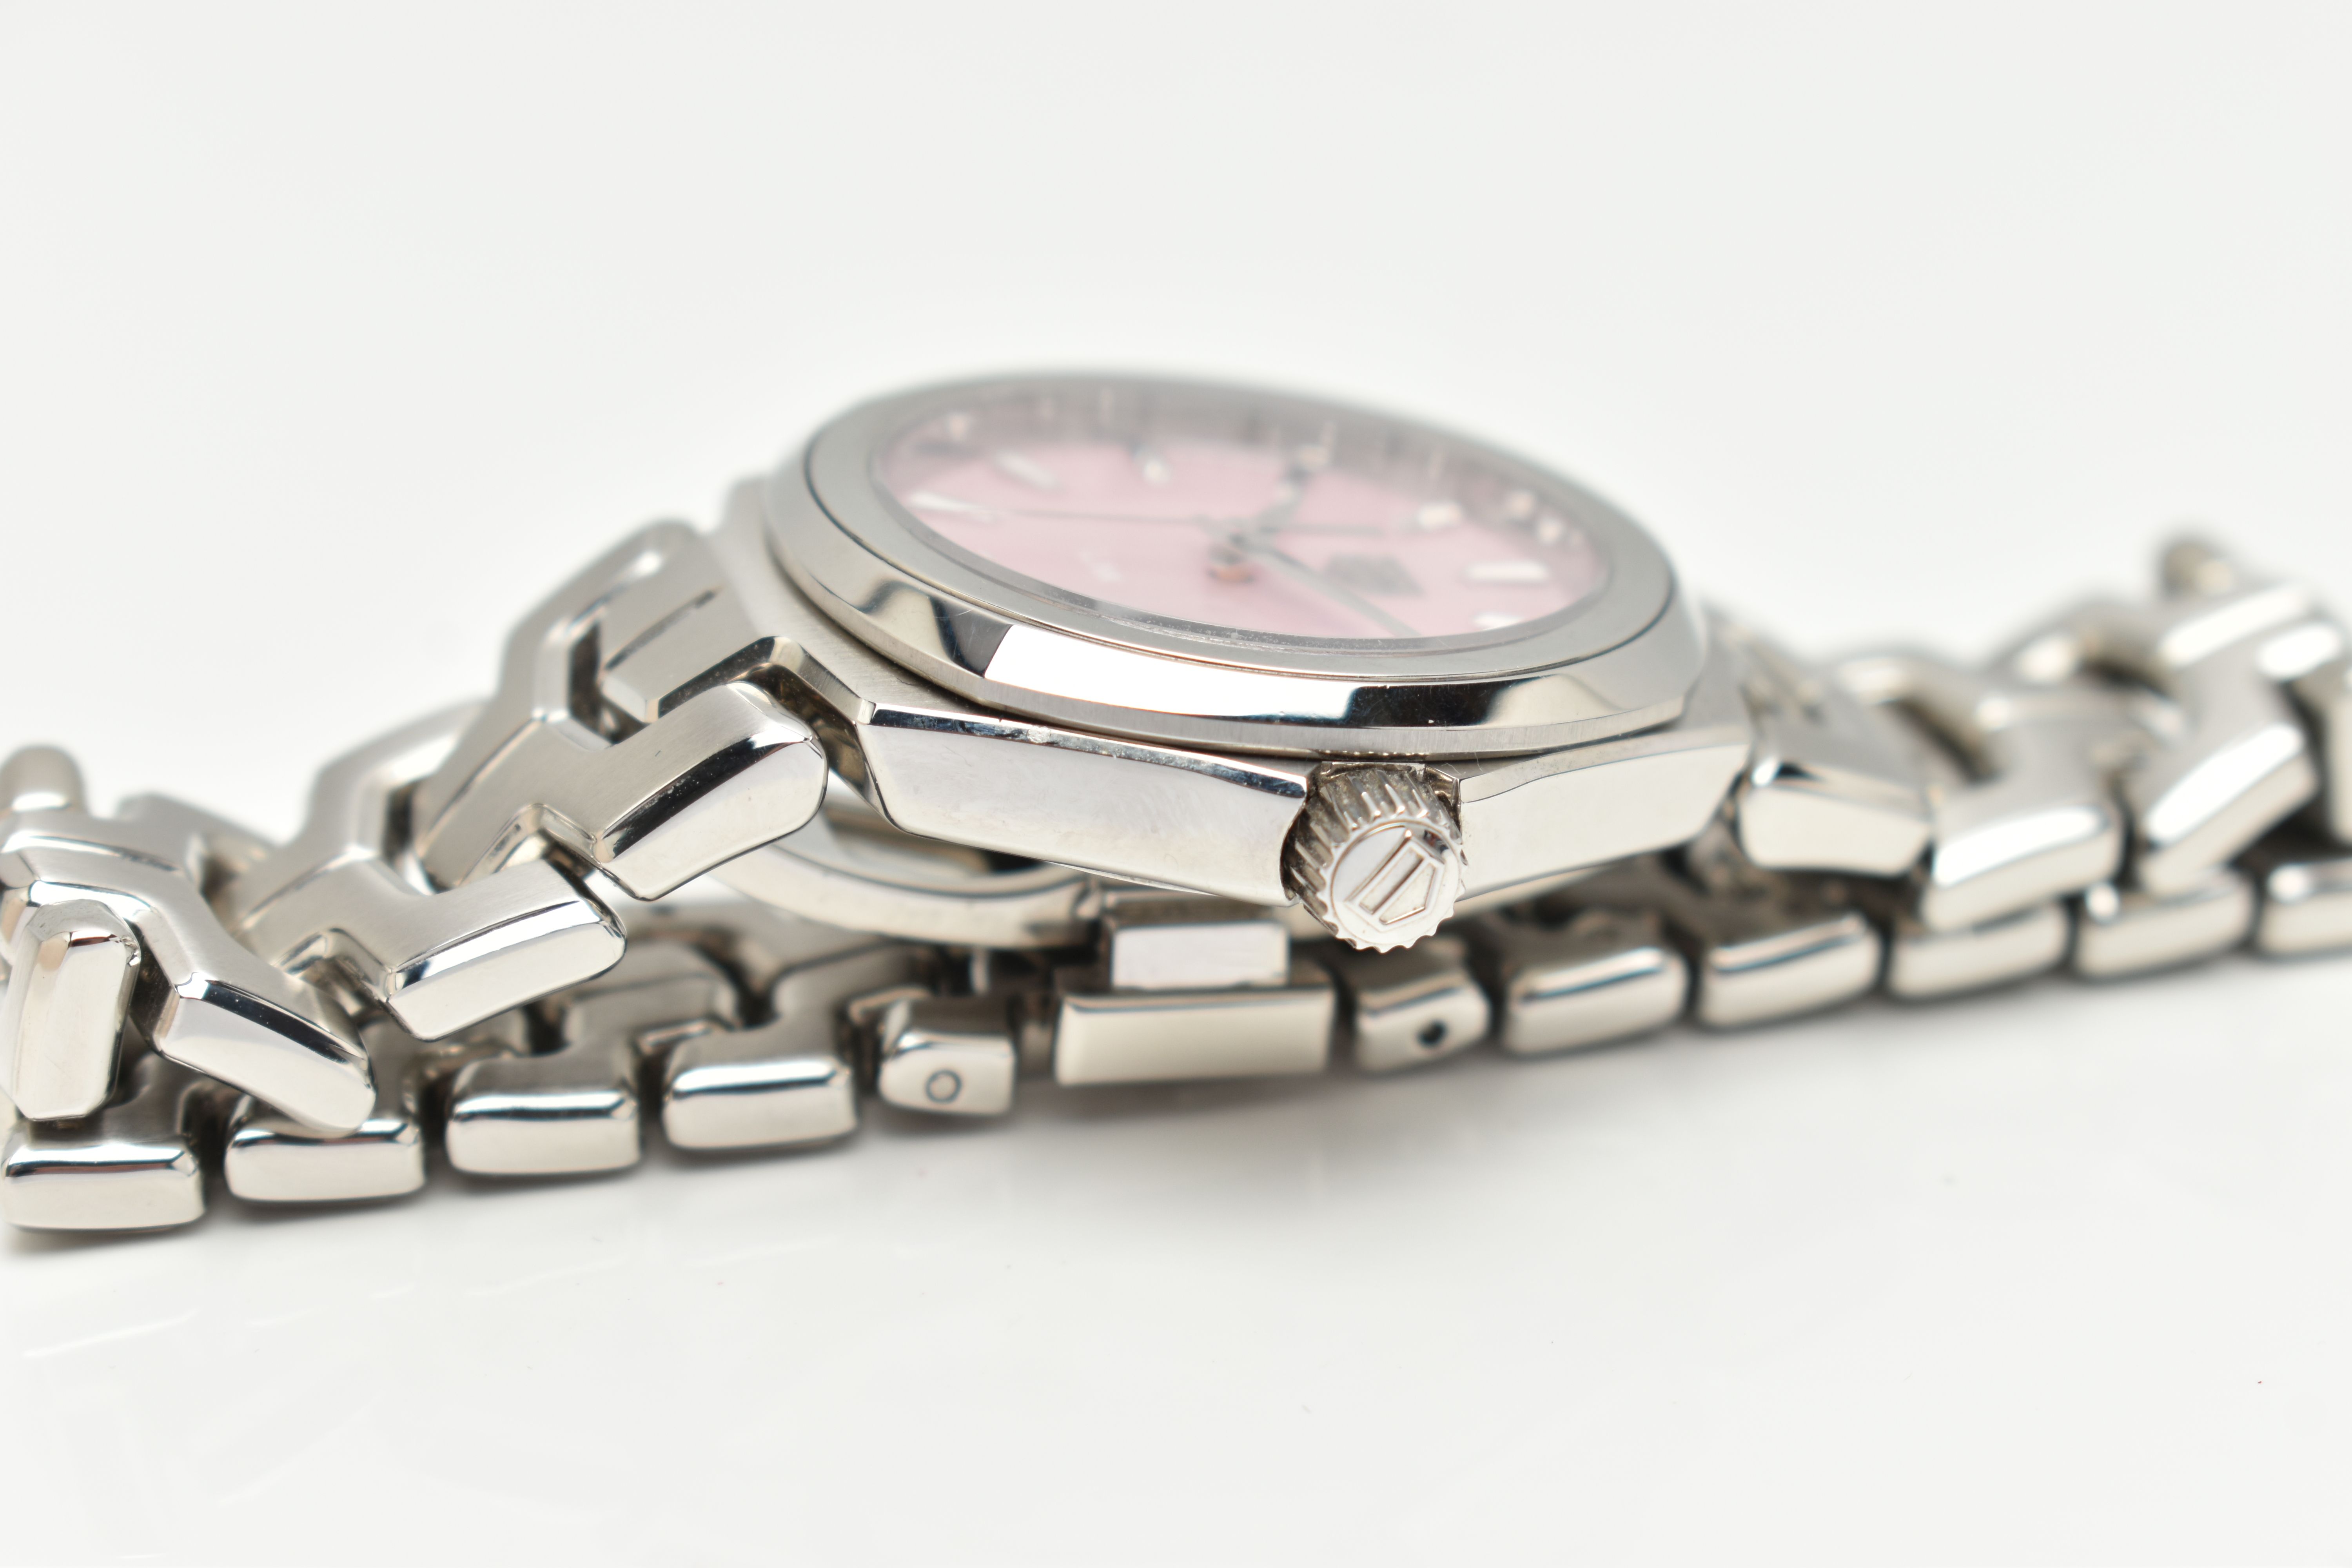 A 'TAG HEUER' LINK LADIES WRISTWATCH, quartz movement, pink dial signed 'Tag Heuer Link', baton - Image 7 of 10